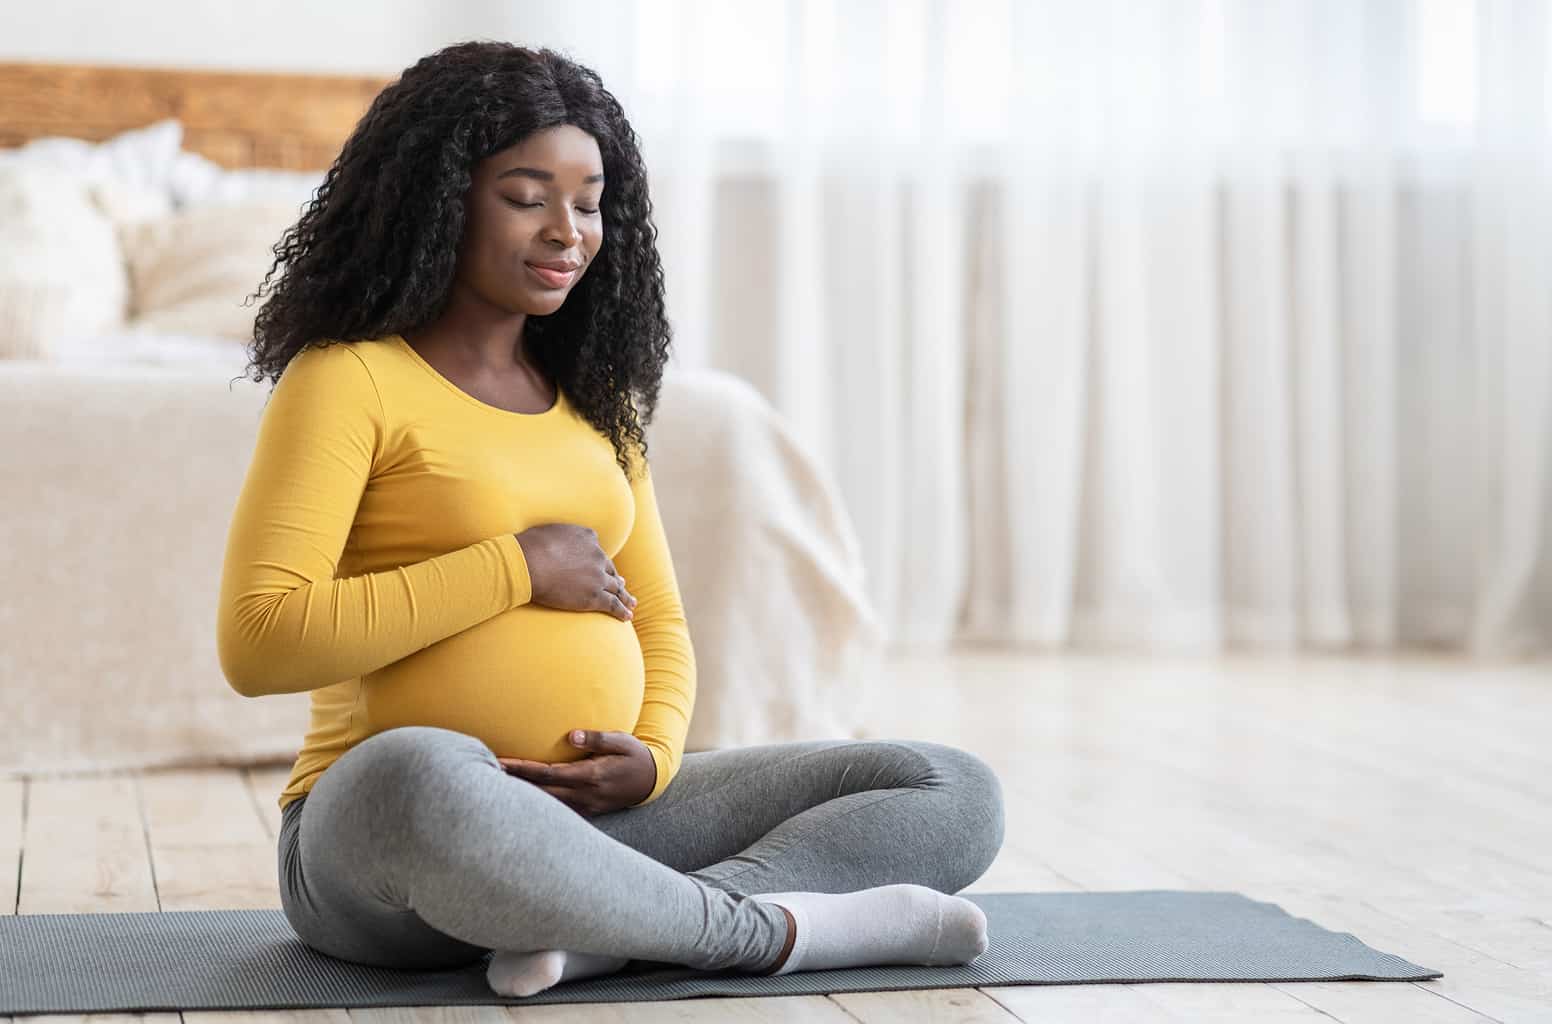 Young Pregnant Woman Sitting on Yoga Mat